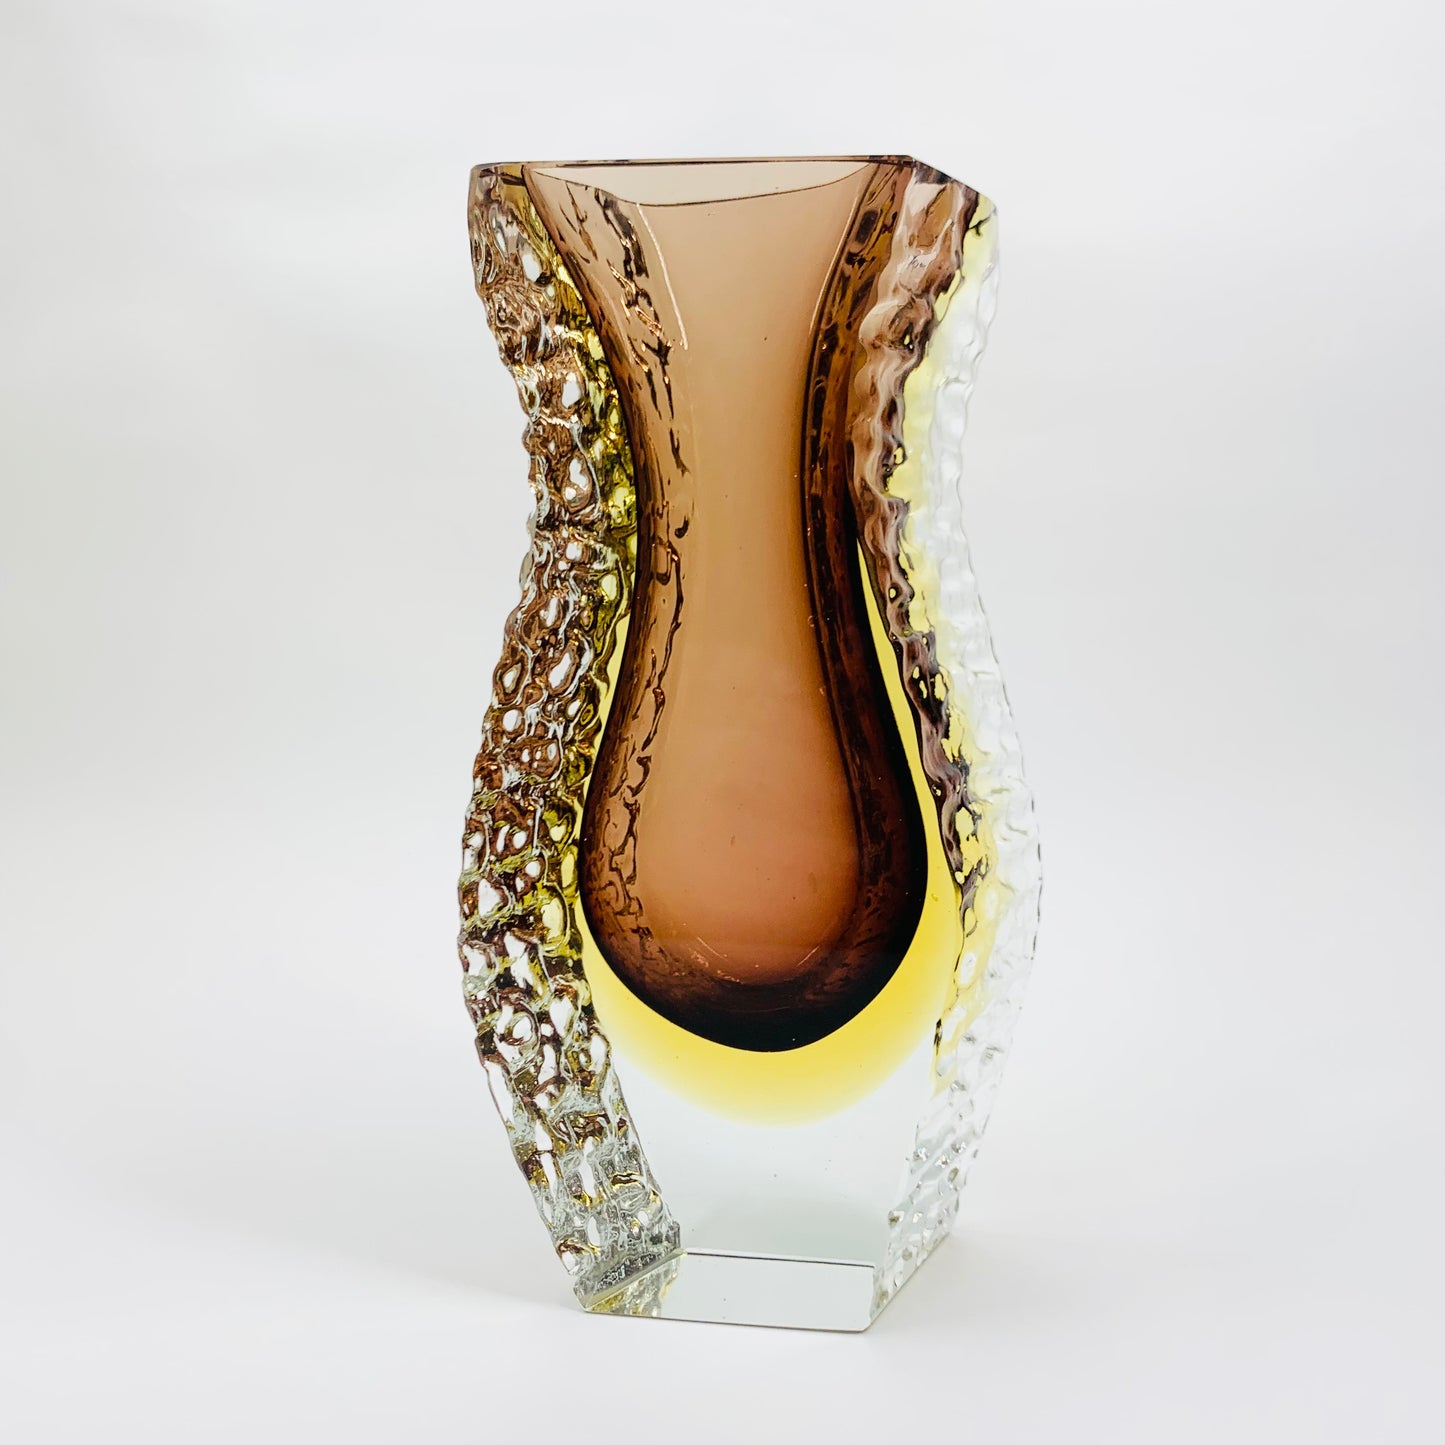 Extremely rare MCM brown & gold textured Murano sommerso trapezoid glass vase by Mandruzzato